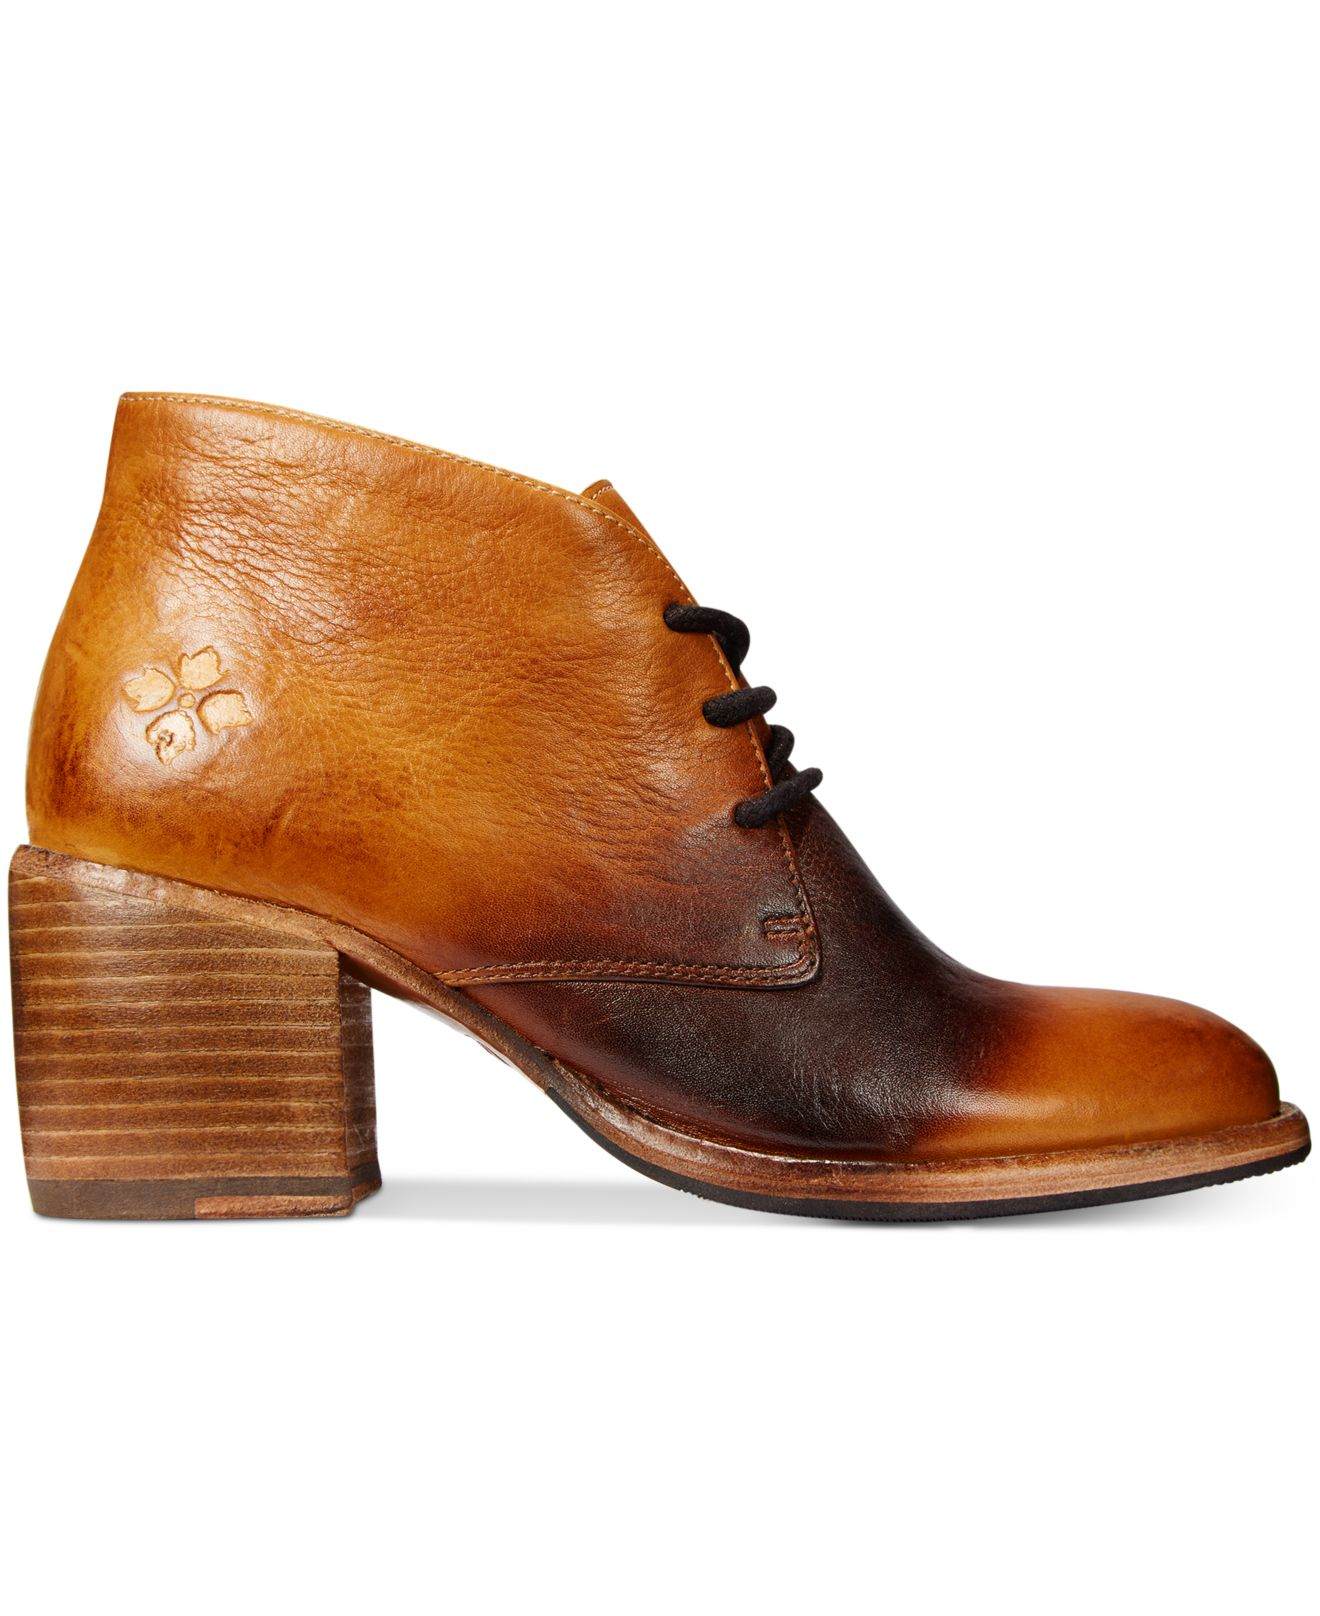 Lyst Patricia Nash Laceup Booties in Brown